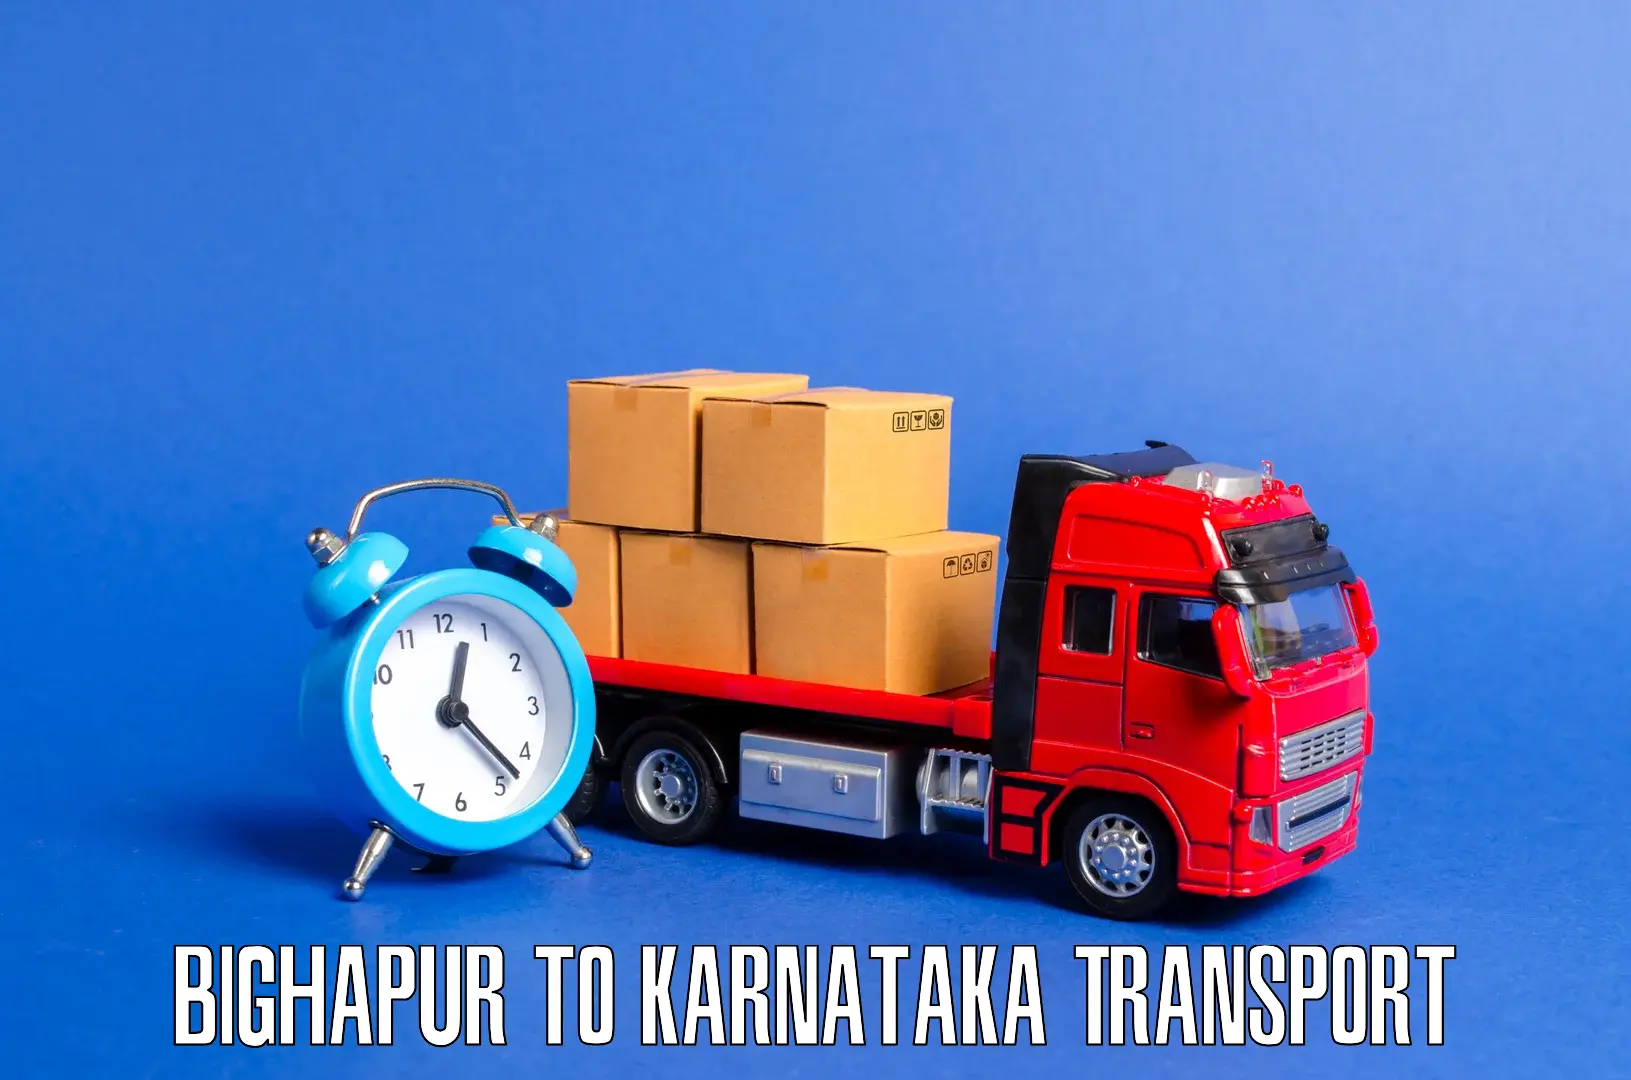 Goods delivery service Bighapur to Mulbagal